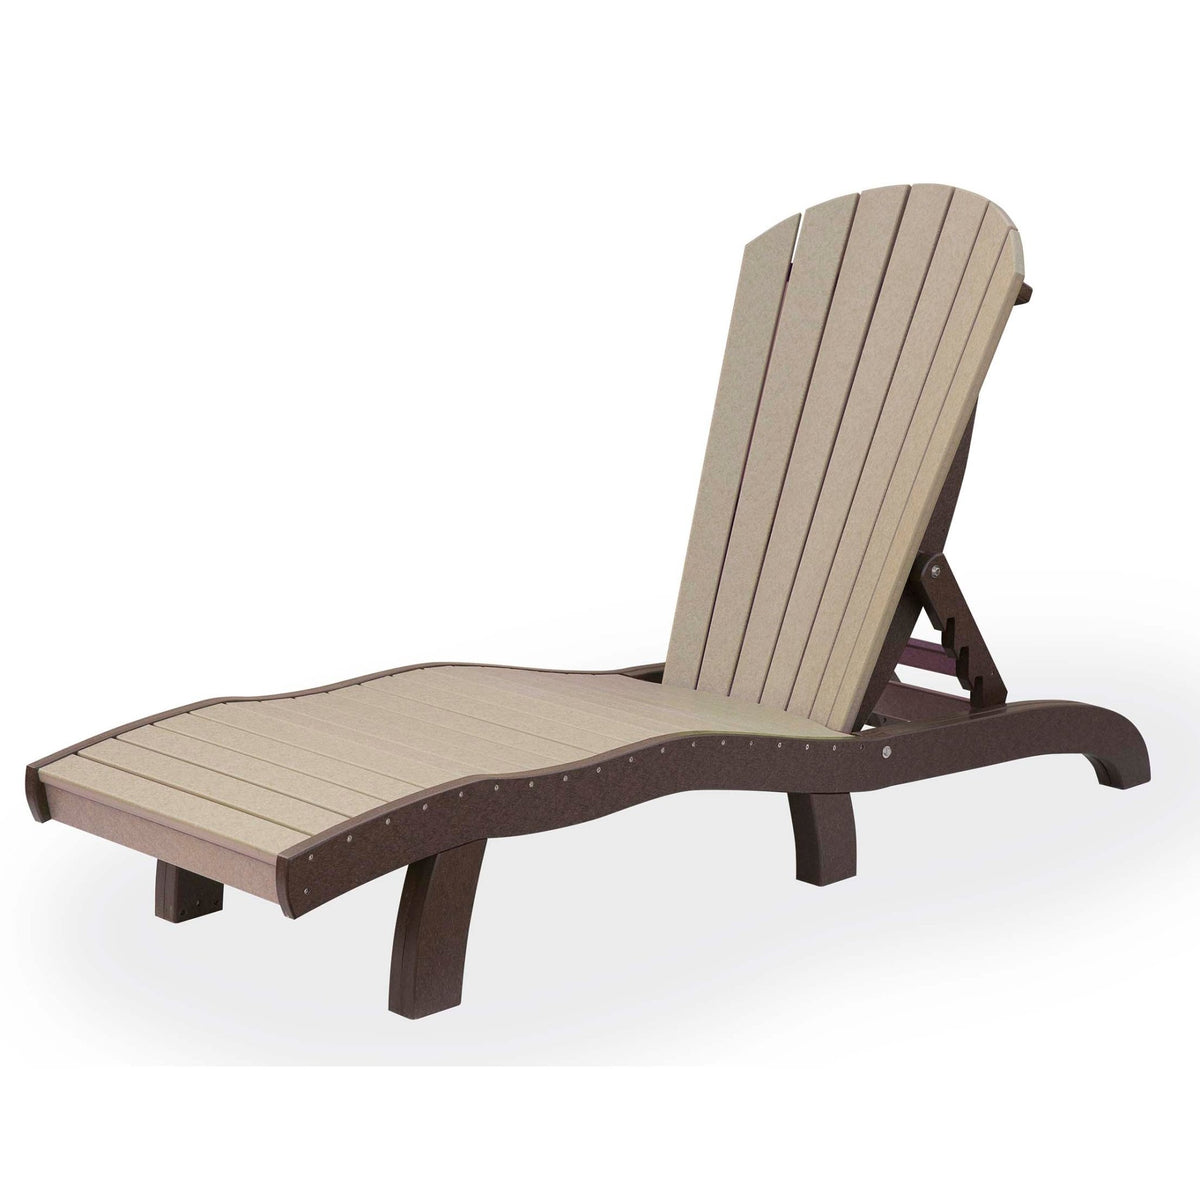 SeaAira Lounge Chair - snyders.furniture